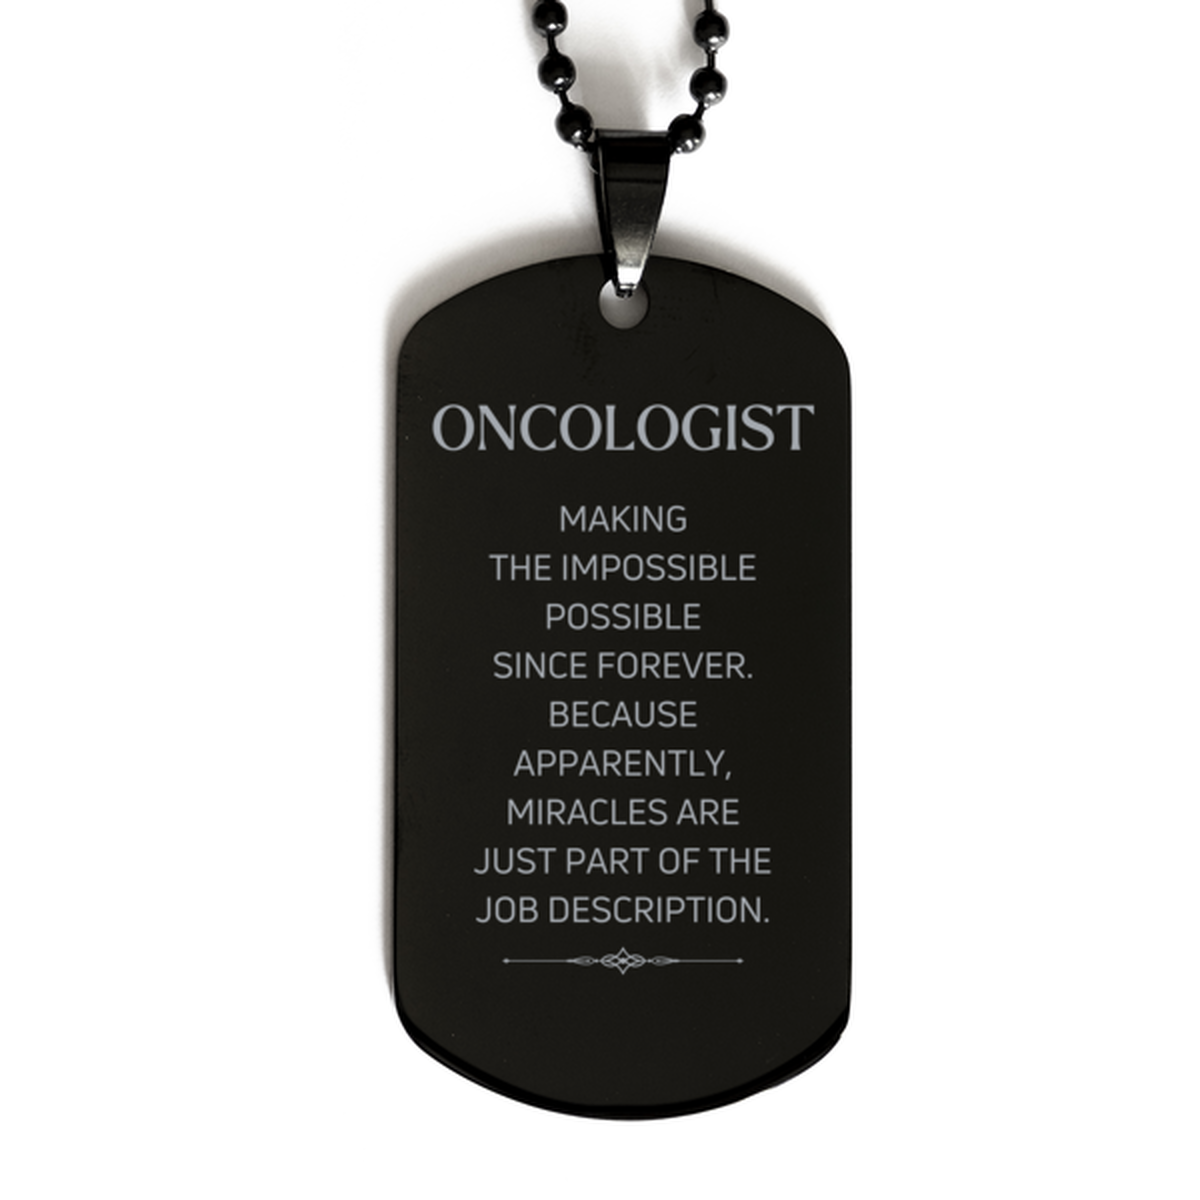 Funny Oncologist Gifts, Miracles are just part of the job description, Inspirational Birthday Black Dog Tag For Oncologist, Men, Women, Coworkers, Friends, Boss